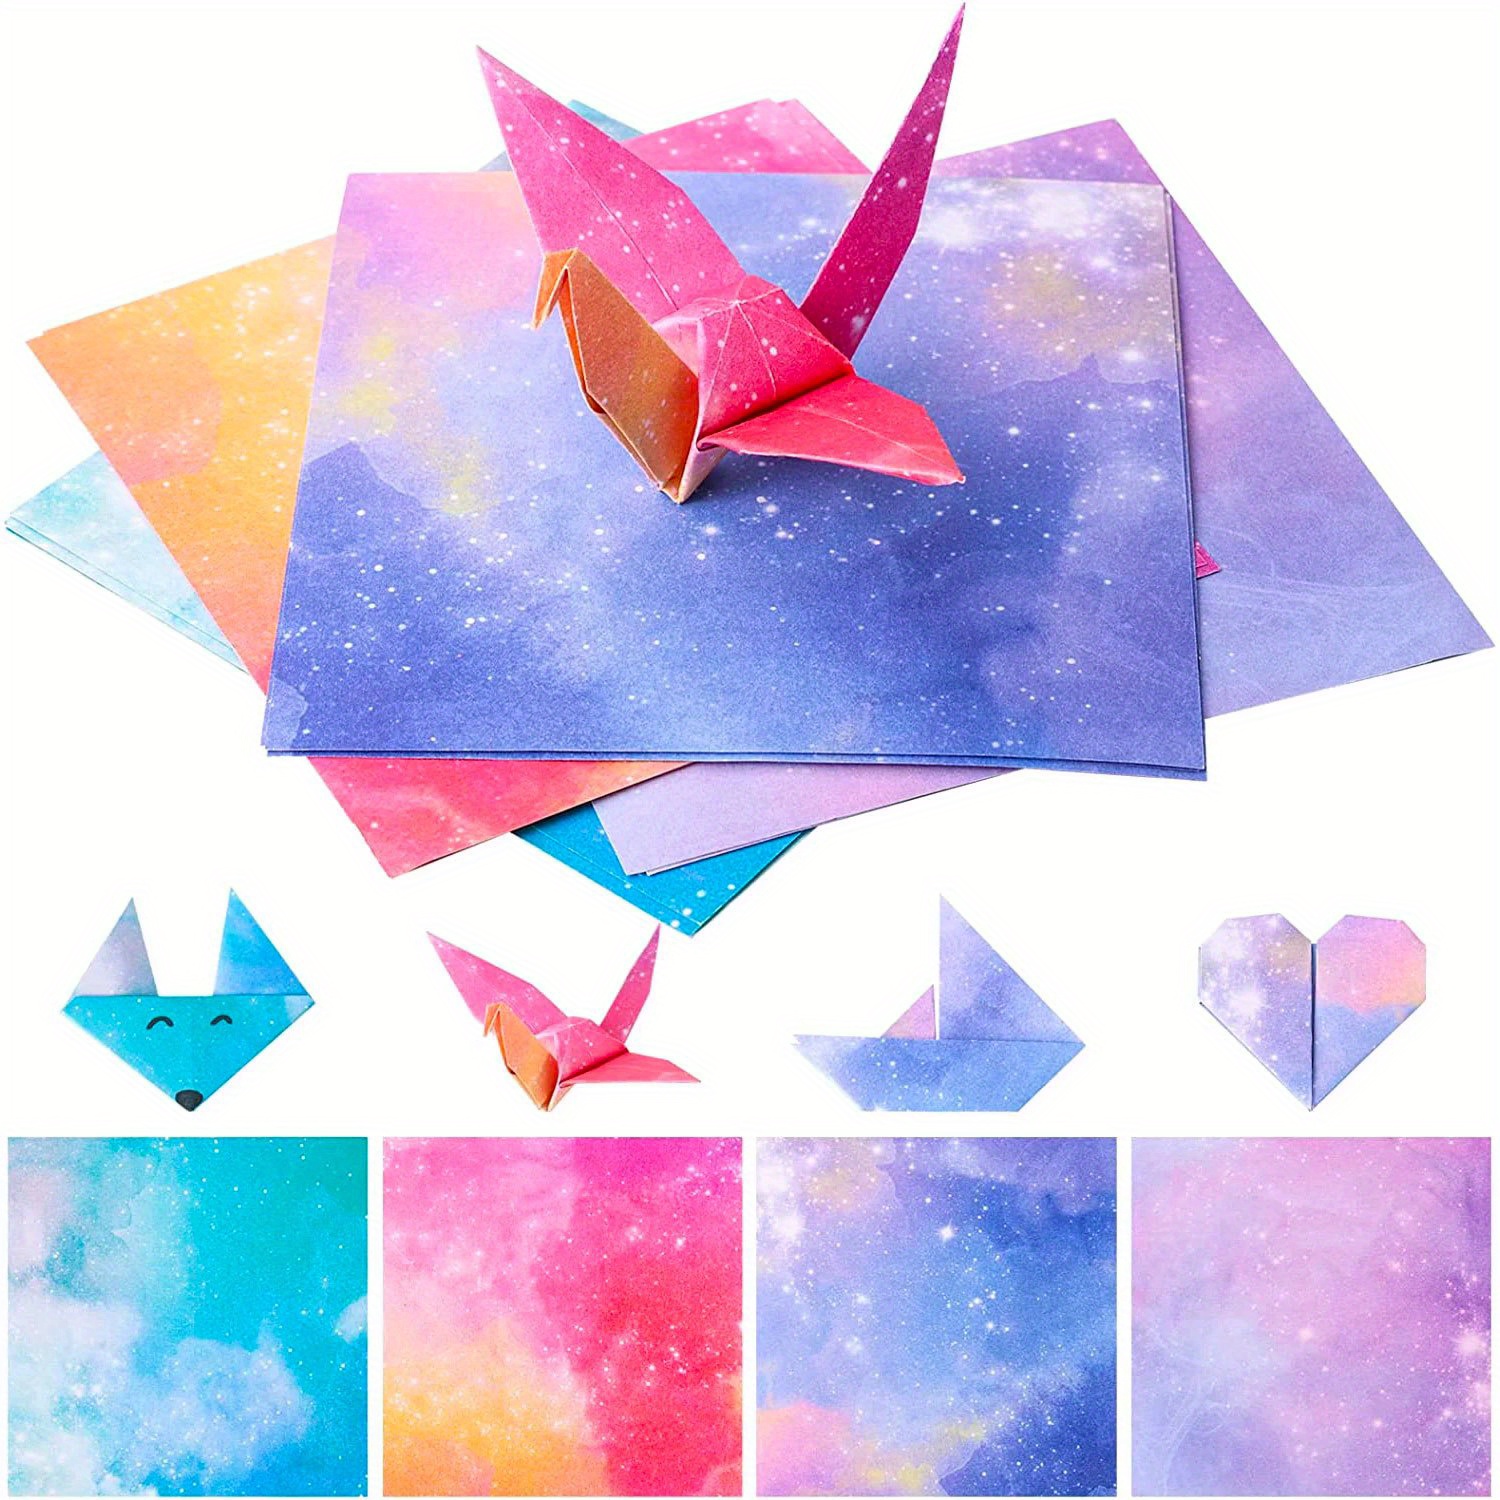 Kids Origami Kit 108 Double Sided Vivid Origami Papers 54 Pairs